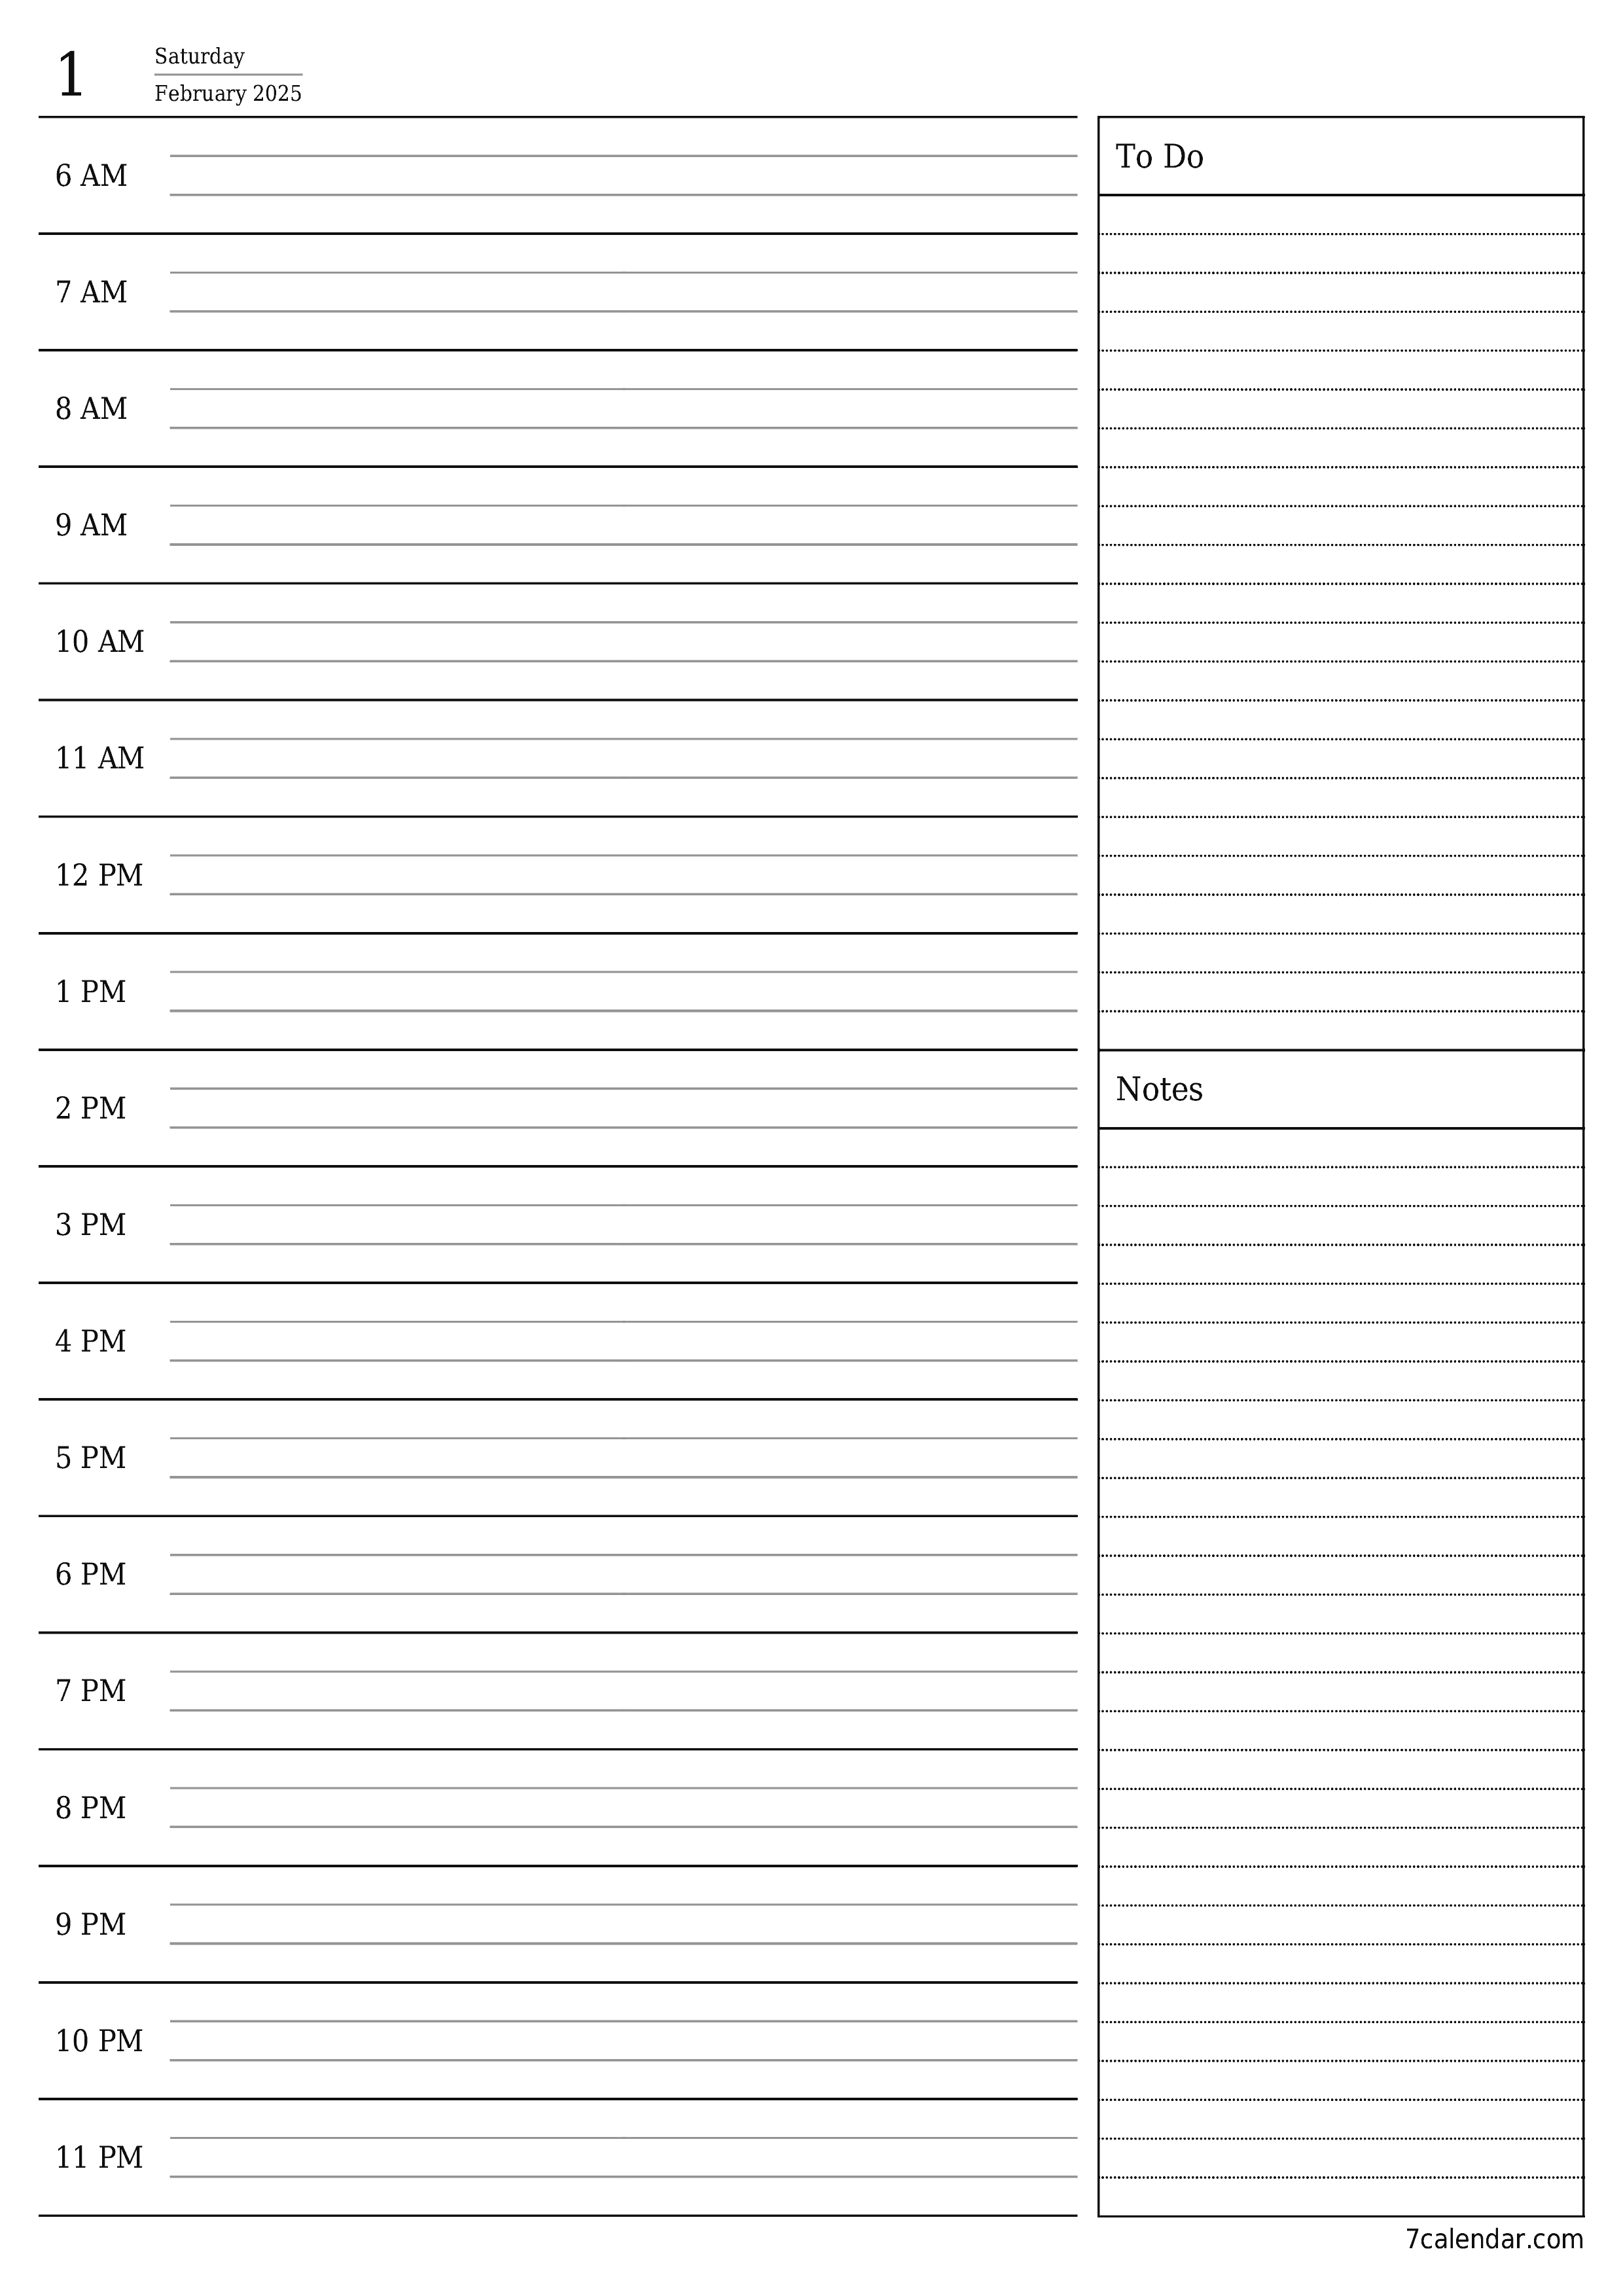 printable wall template free vertical Daily planner calendar February (Feb) 2025